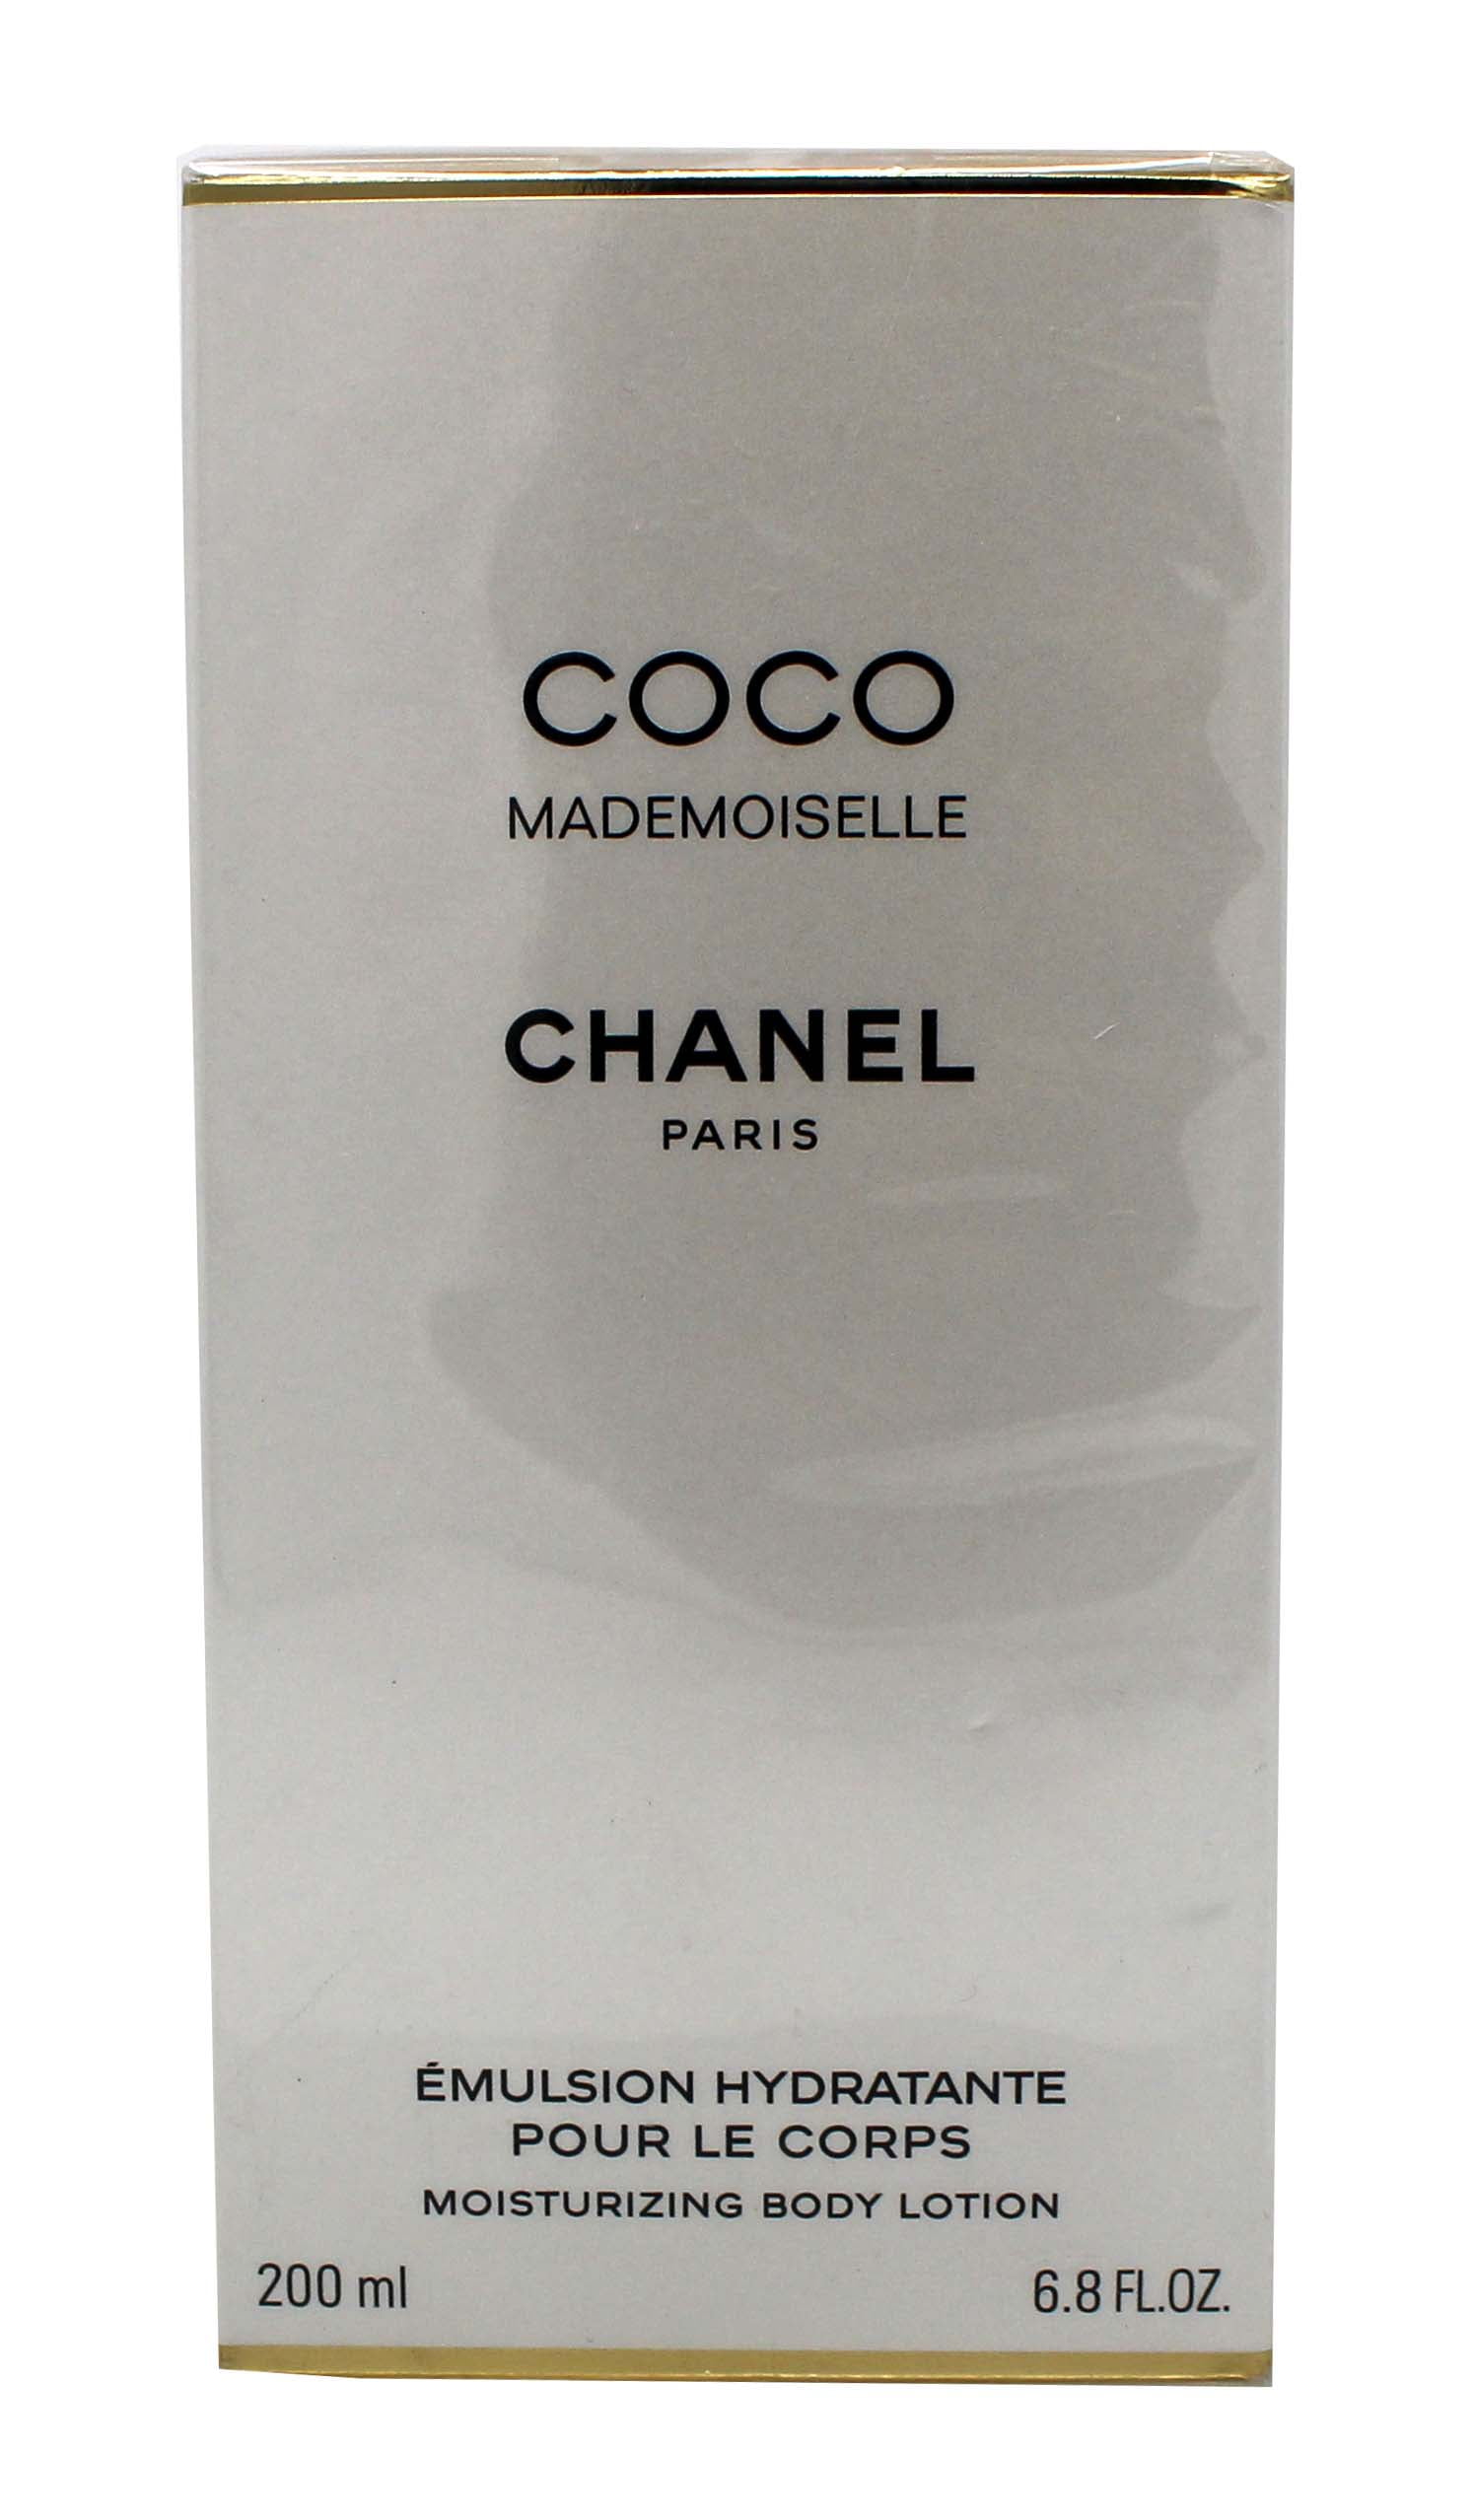  Coco Mademoiselle Moisturizing Body Lotion (Made In